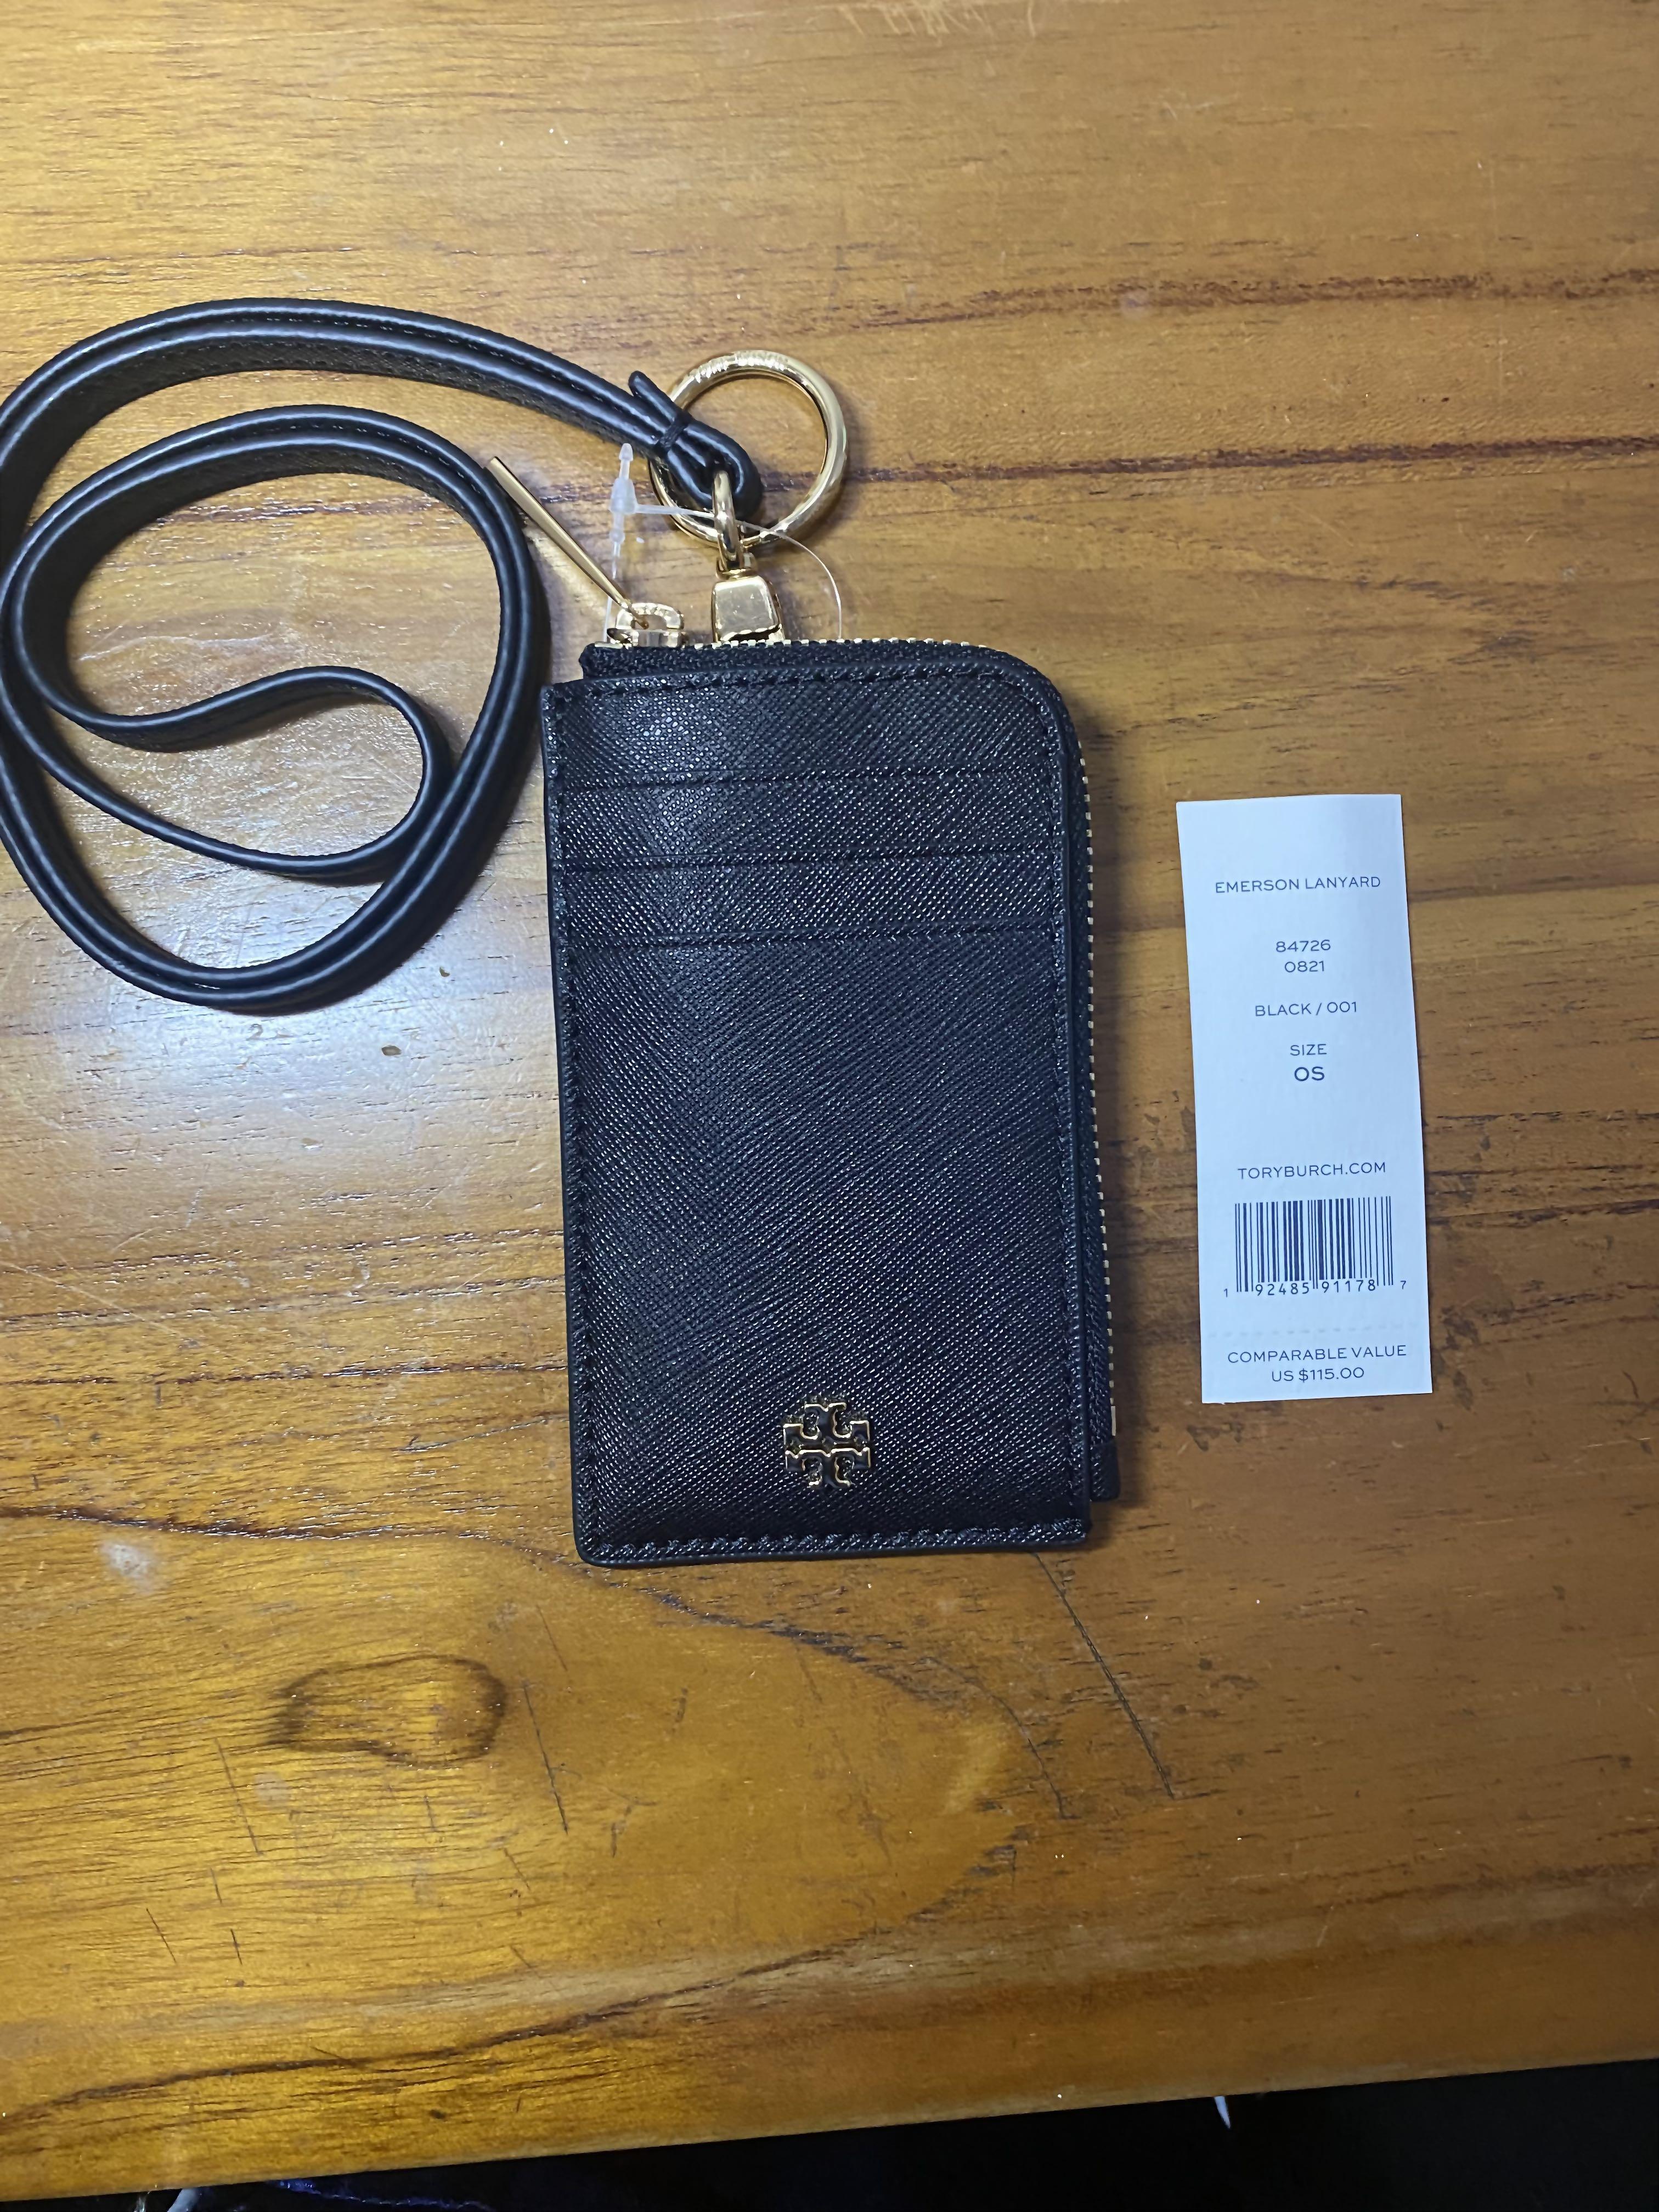 Tory Burch Emerson Lanyard in Black – Exclusively USA